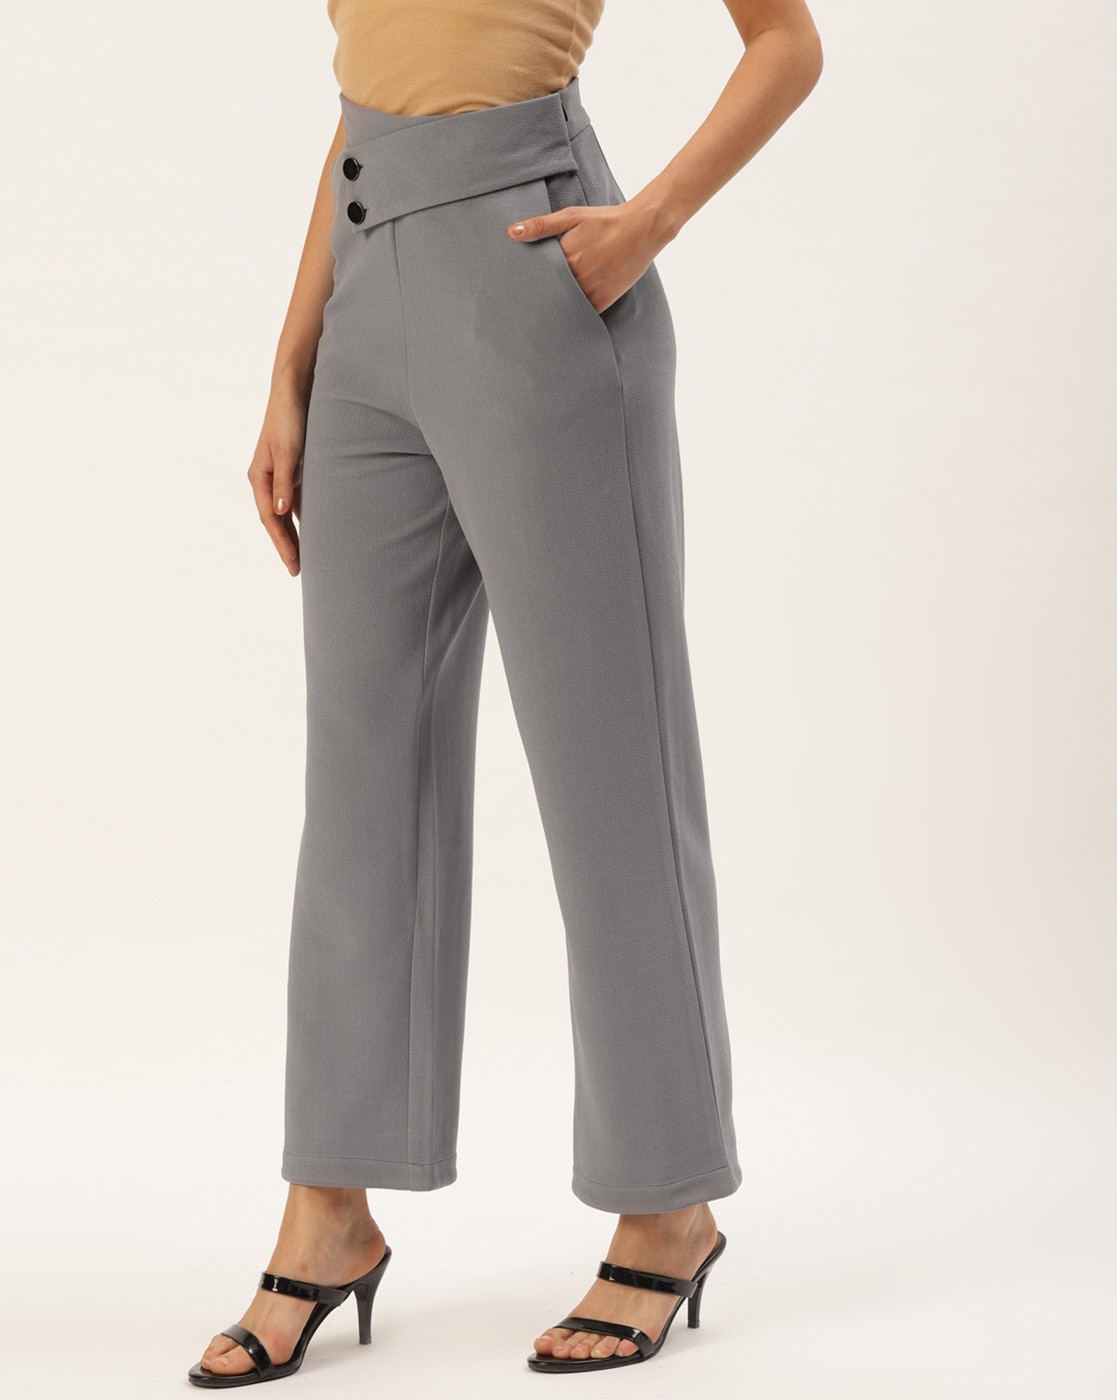 Trouser Suits For Women 2023: The best women's trouser suits to buy-anthinhphatland.vn